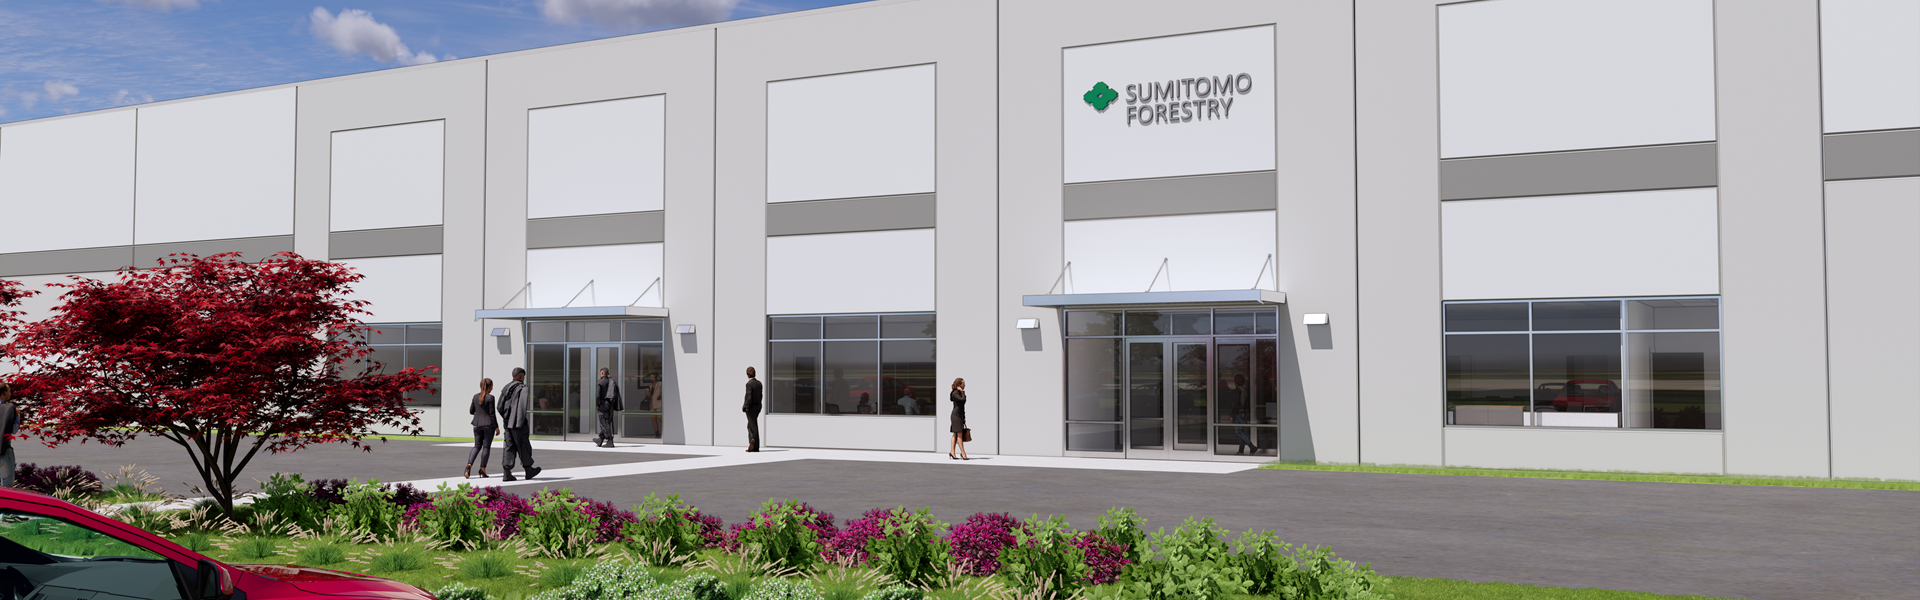 Crescent Communities and Sumitomo Forestry America, Inc. Announce New Manufacturing and Distribution Project in North Carolina